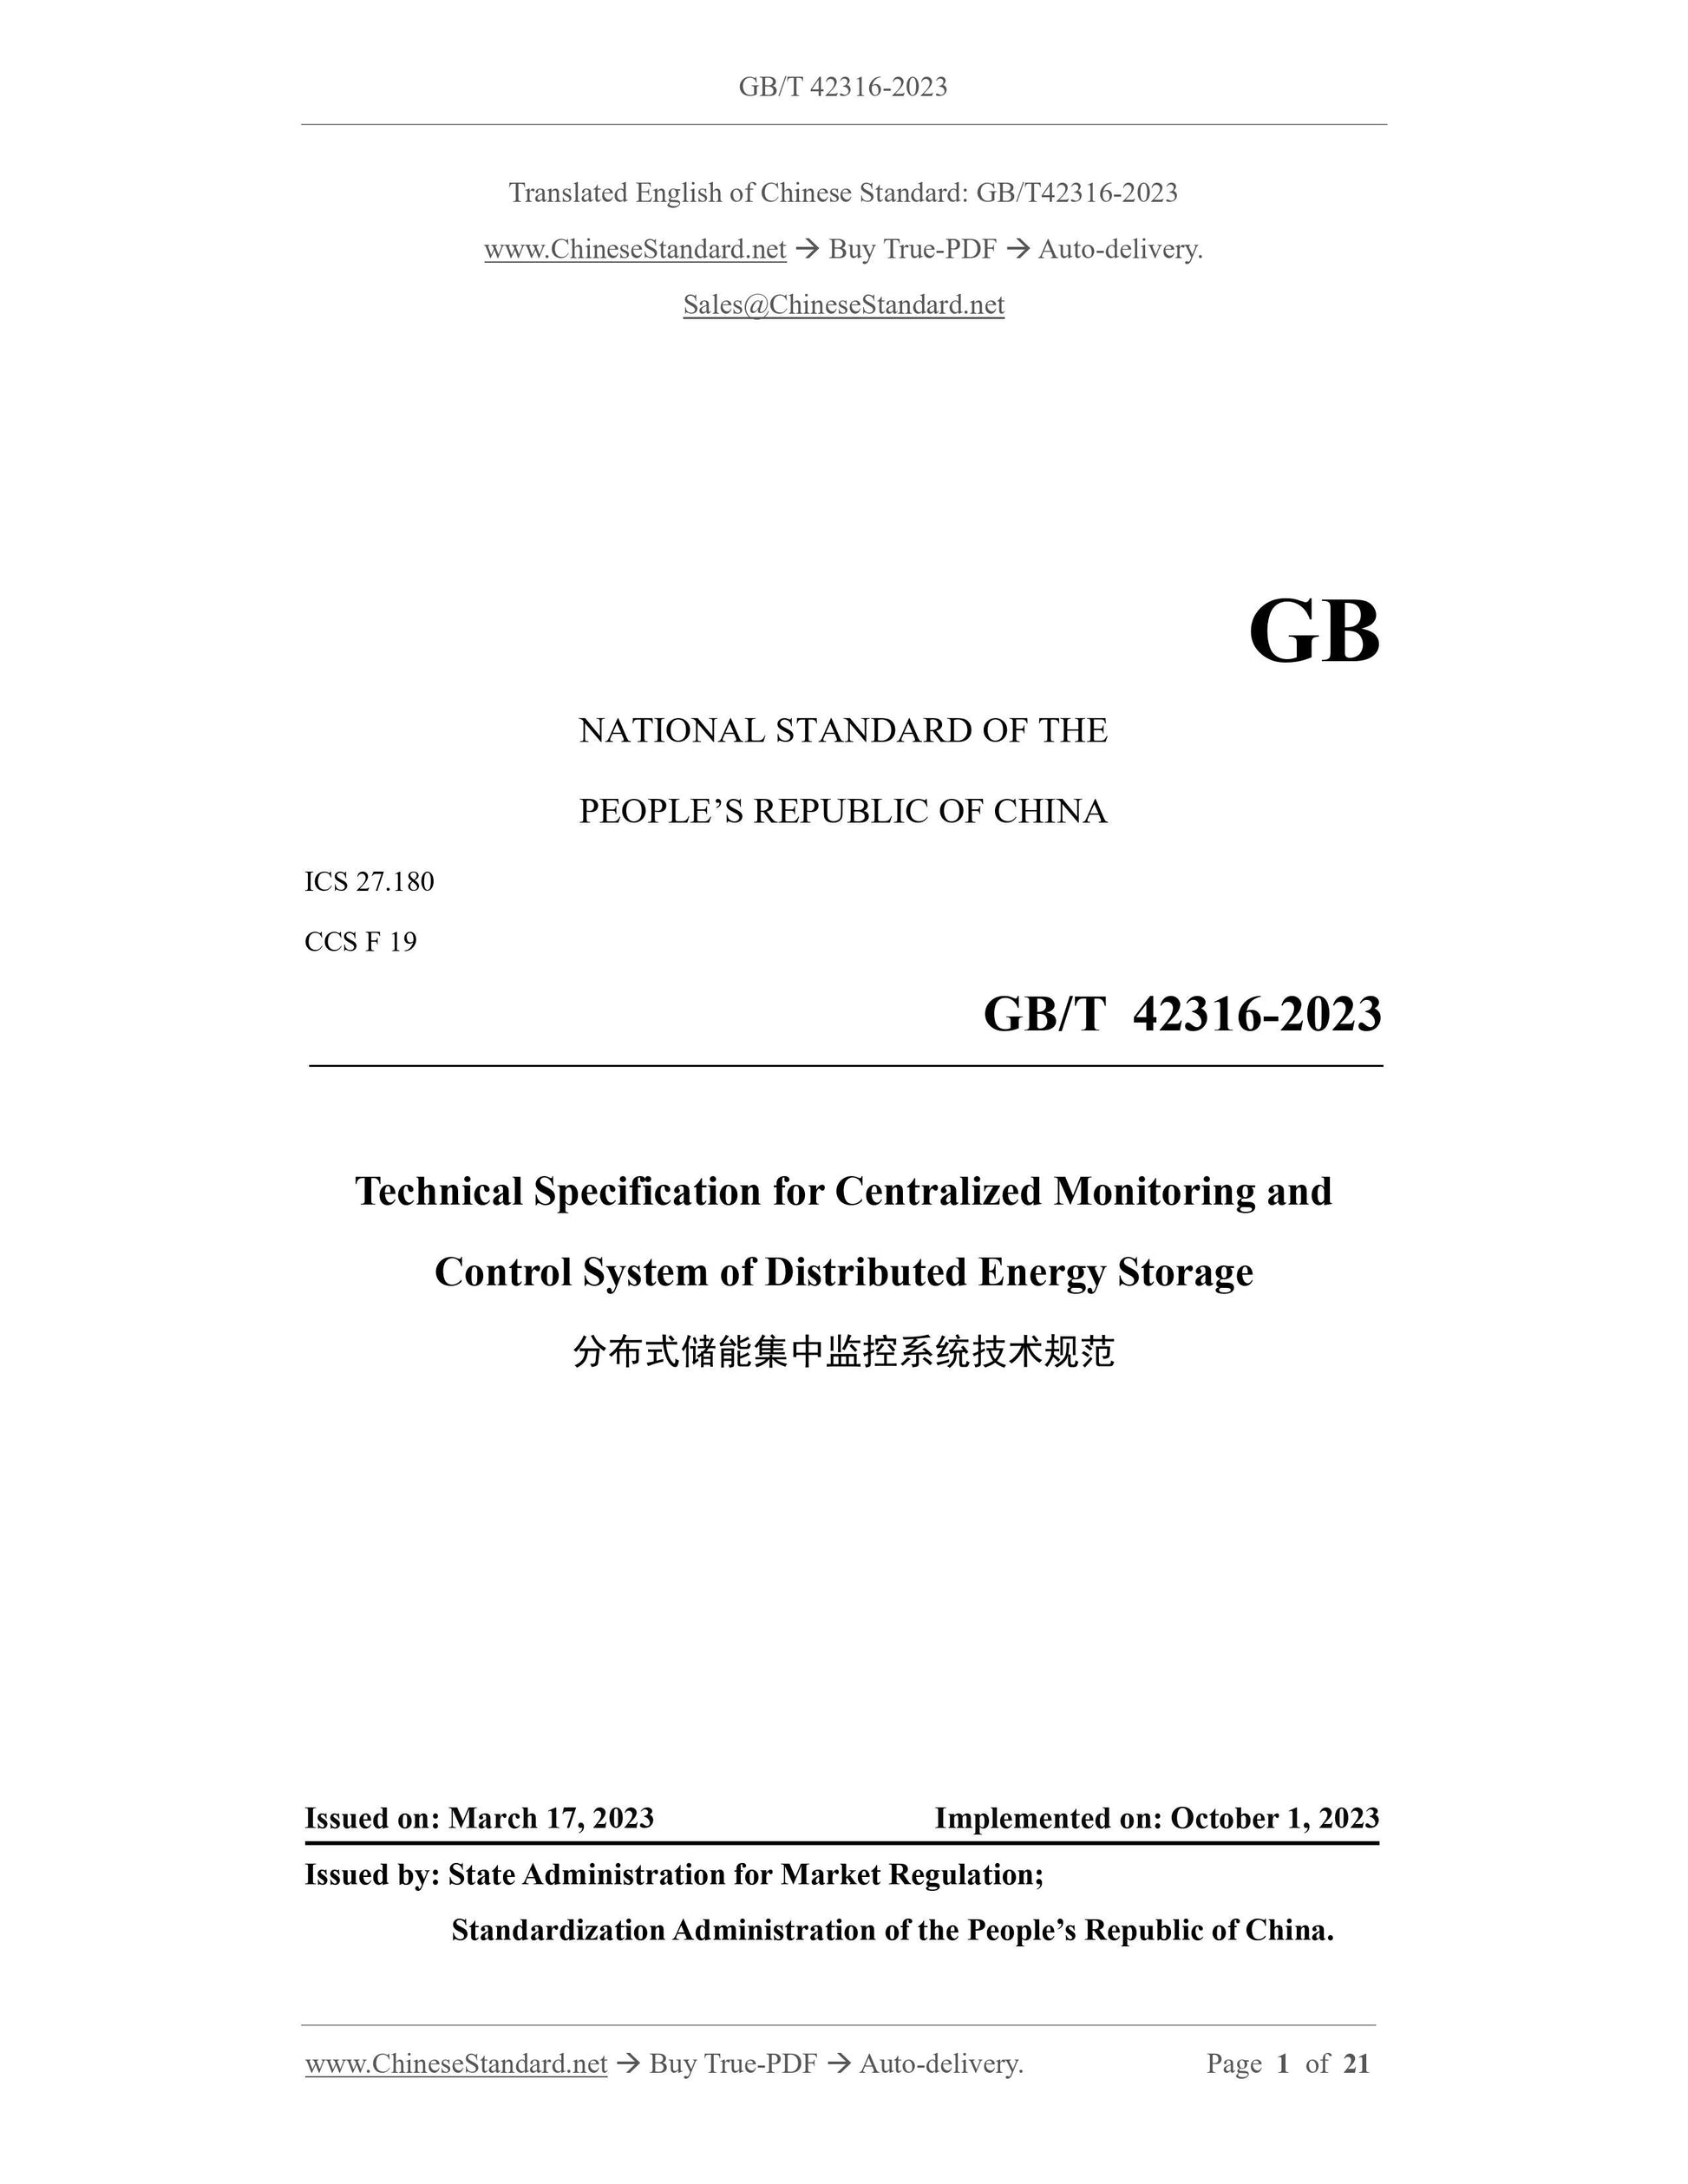 GB/T 42316-2023 Page 1